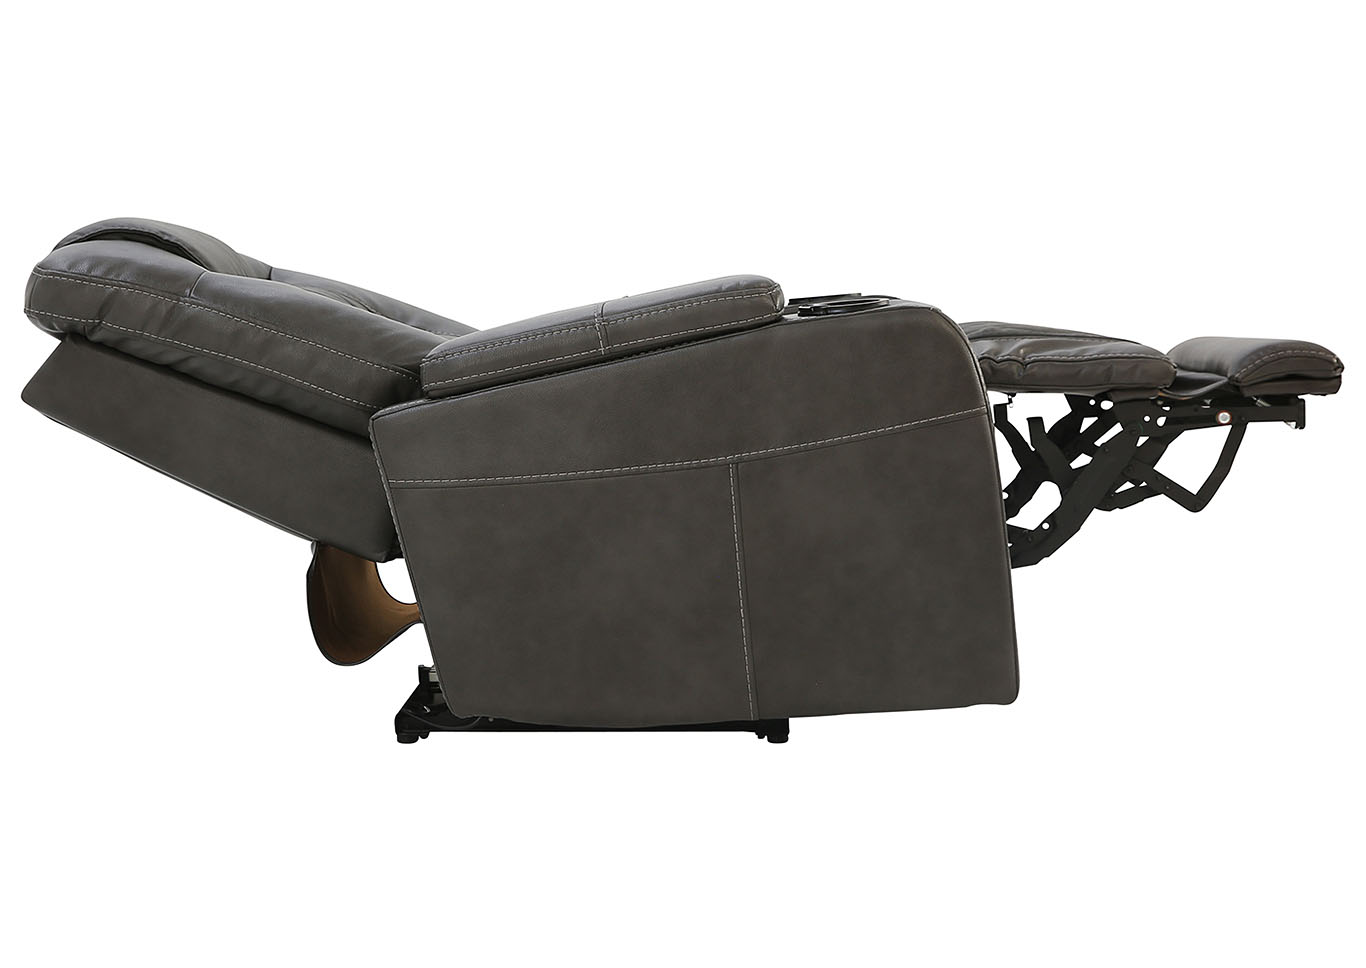 COMPOSER GRAY POWER RECLINER,ASHLEY FURNITURE INC.